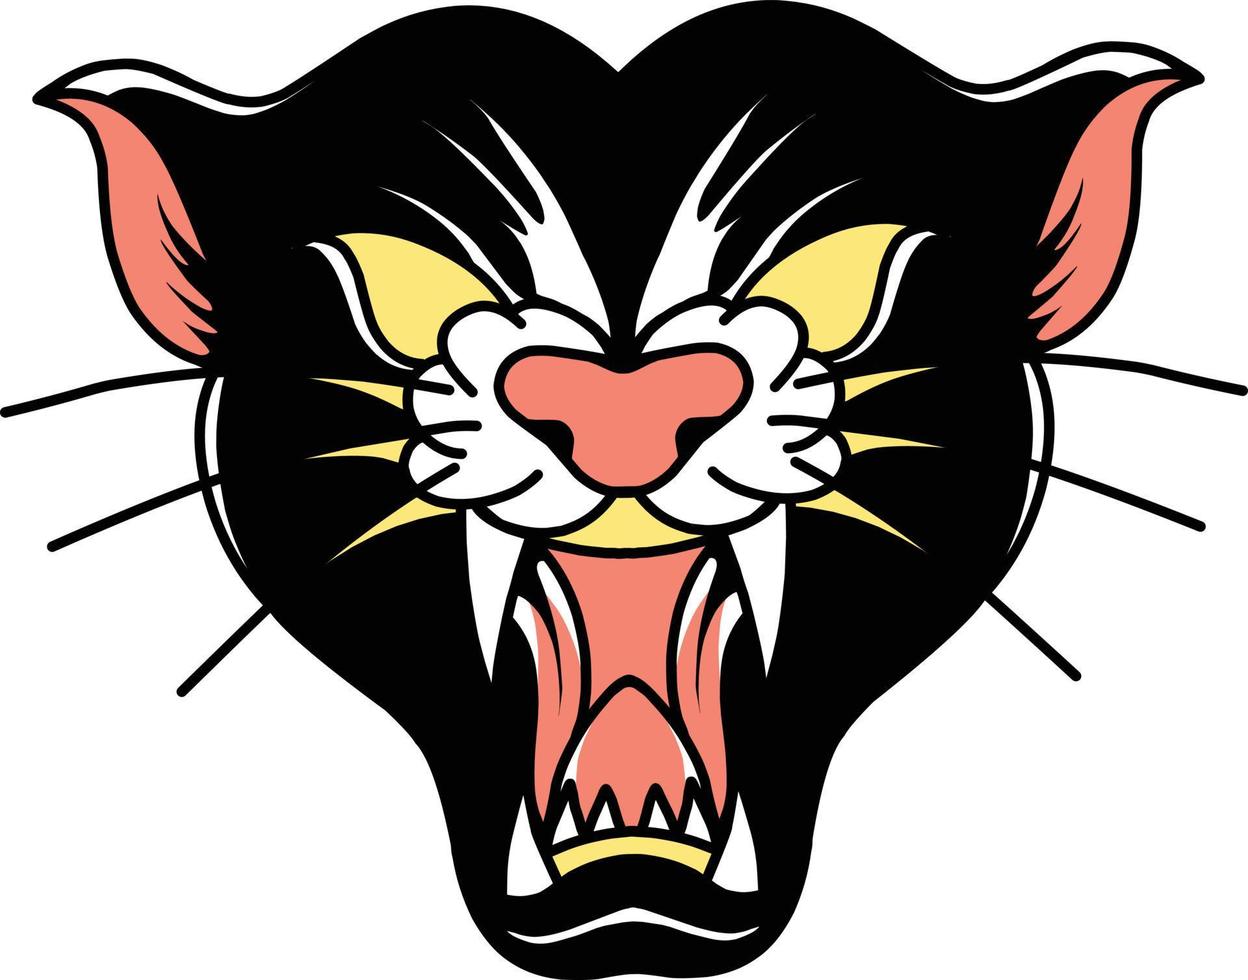 panther vector which is suitable for sticker packing and other needs